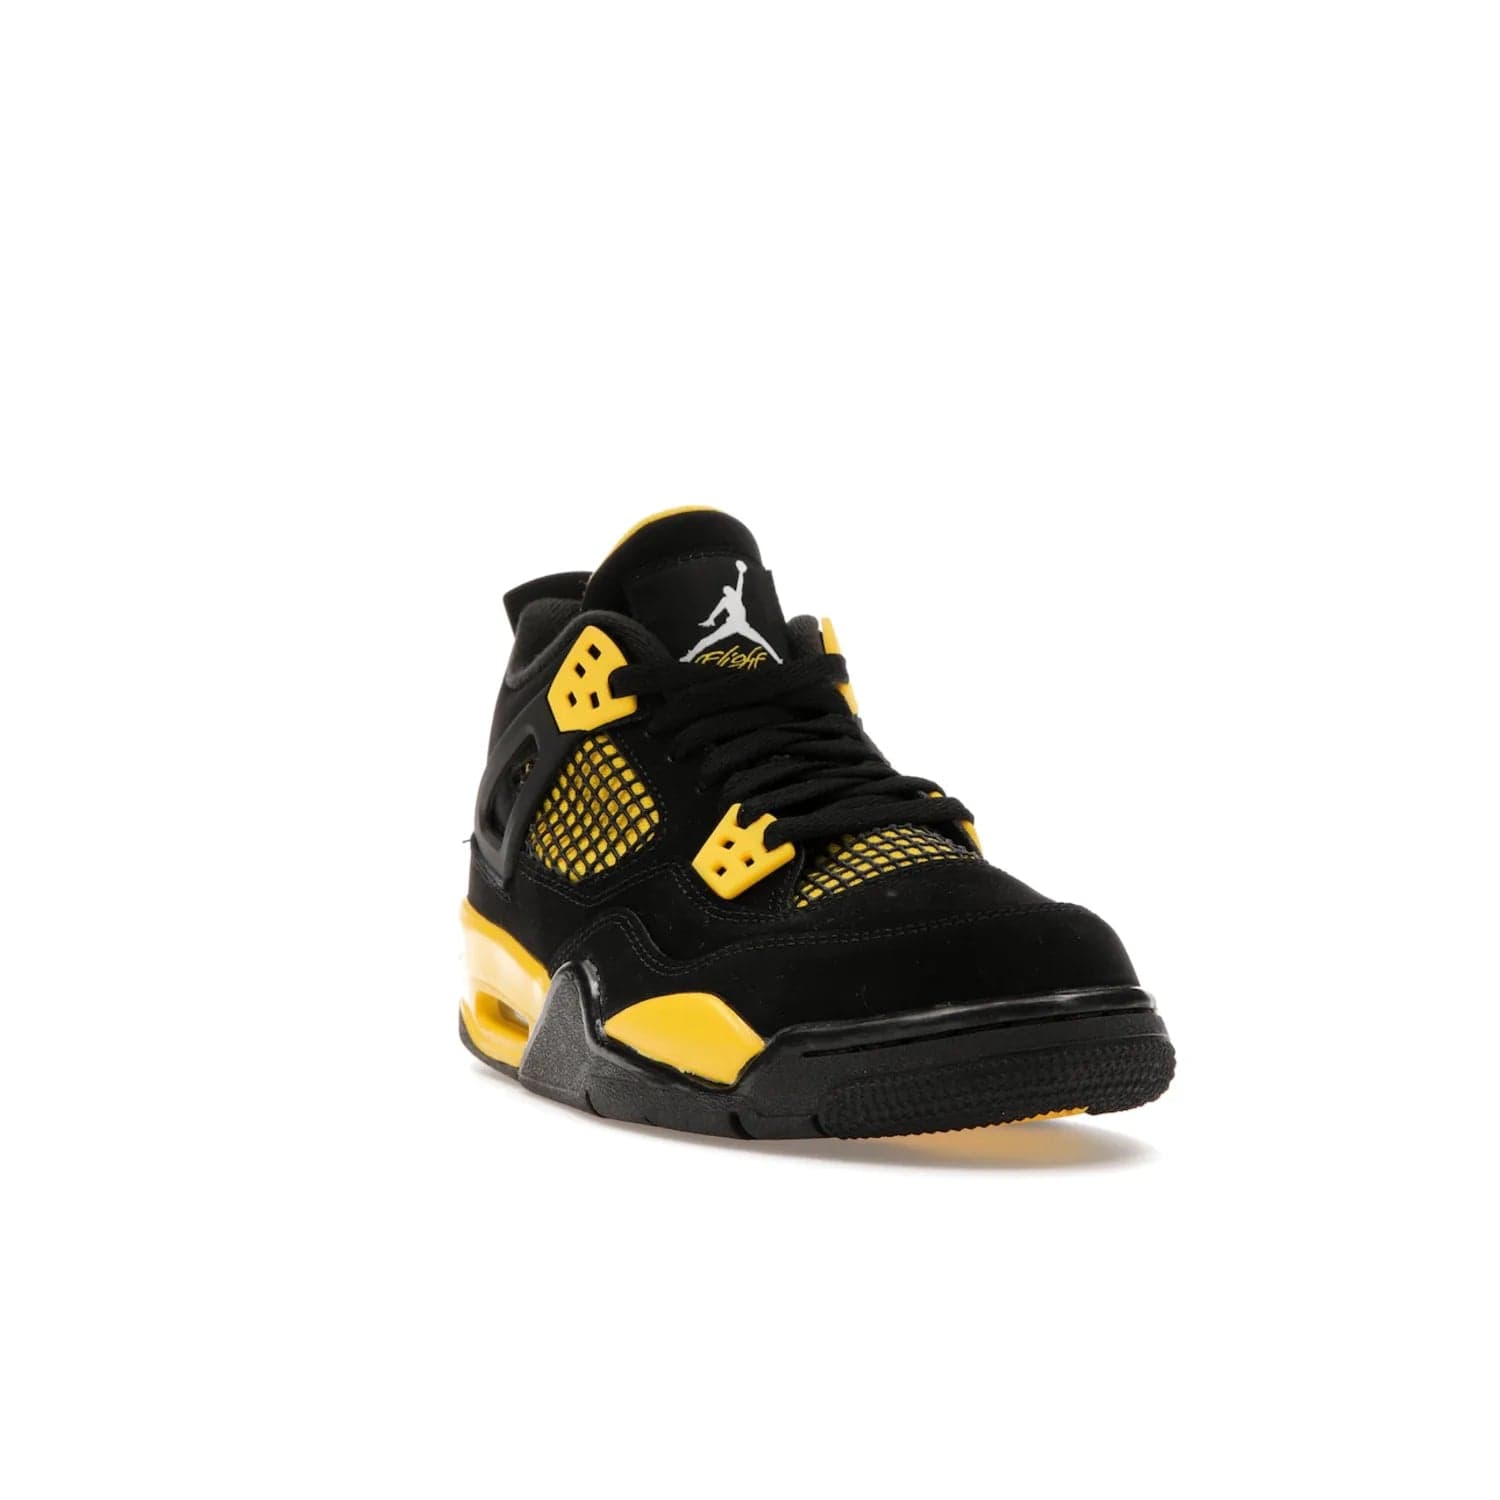 Jordan 4 Retro Thunder (2023) (GS) - Image 7 - Only at www.BallersClubKickz.com - Introducing the iconic Jordan 4 Retro Thunder from the 2023 collection! Sleek black and Tour Yellow detailing. Signature Jordan tongue tab. Mesmerizing design for sneaker collectors. Get yours now!